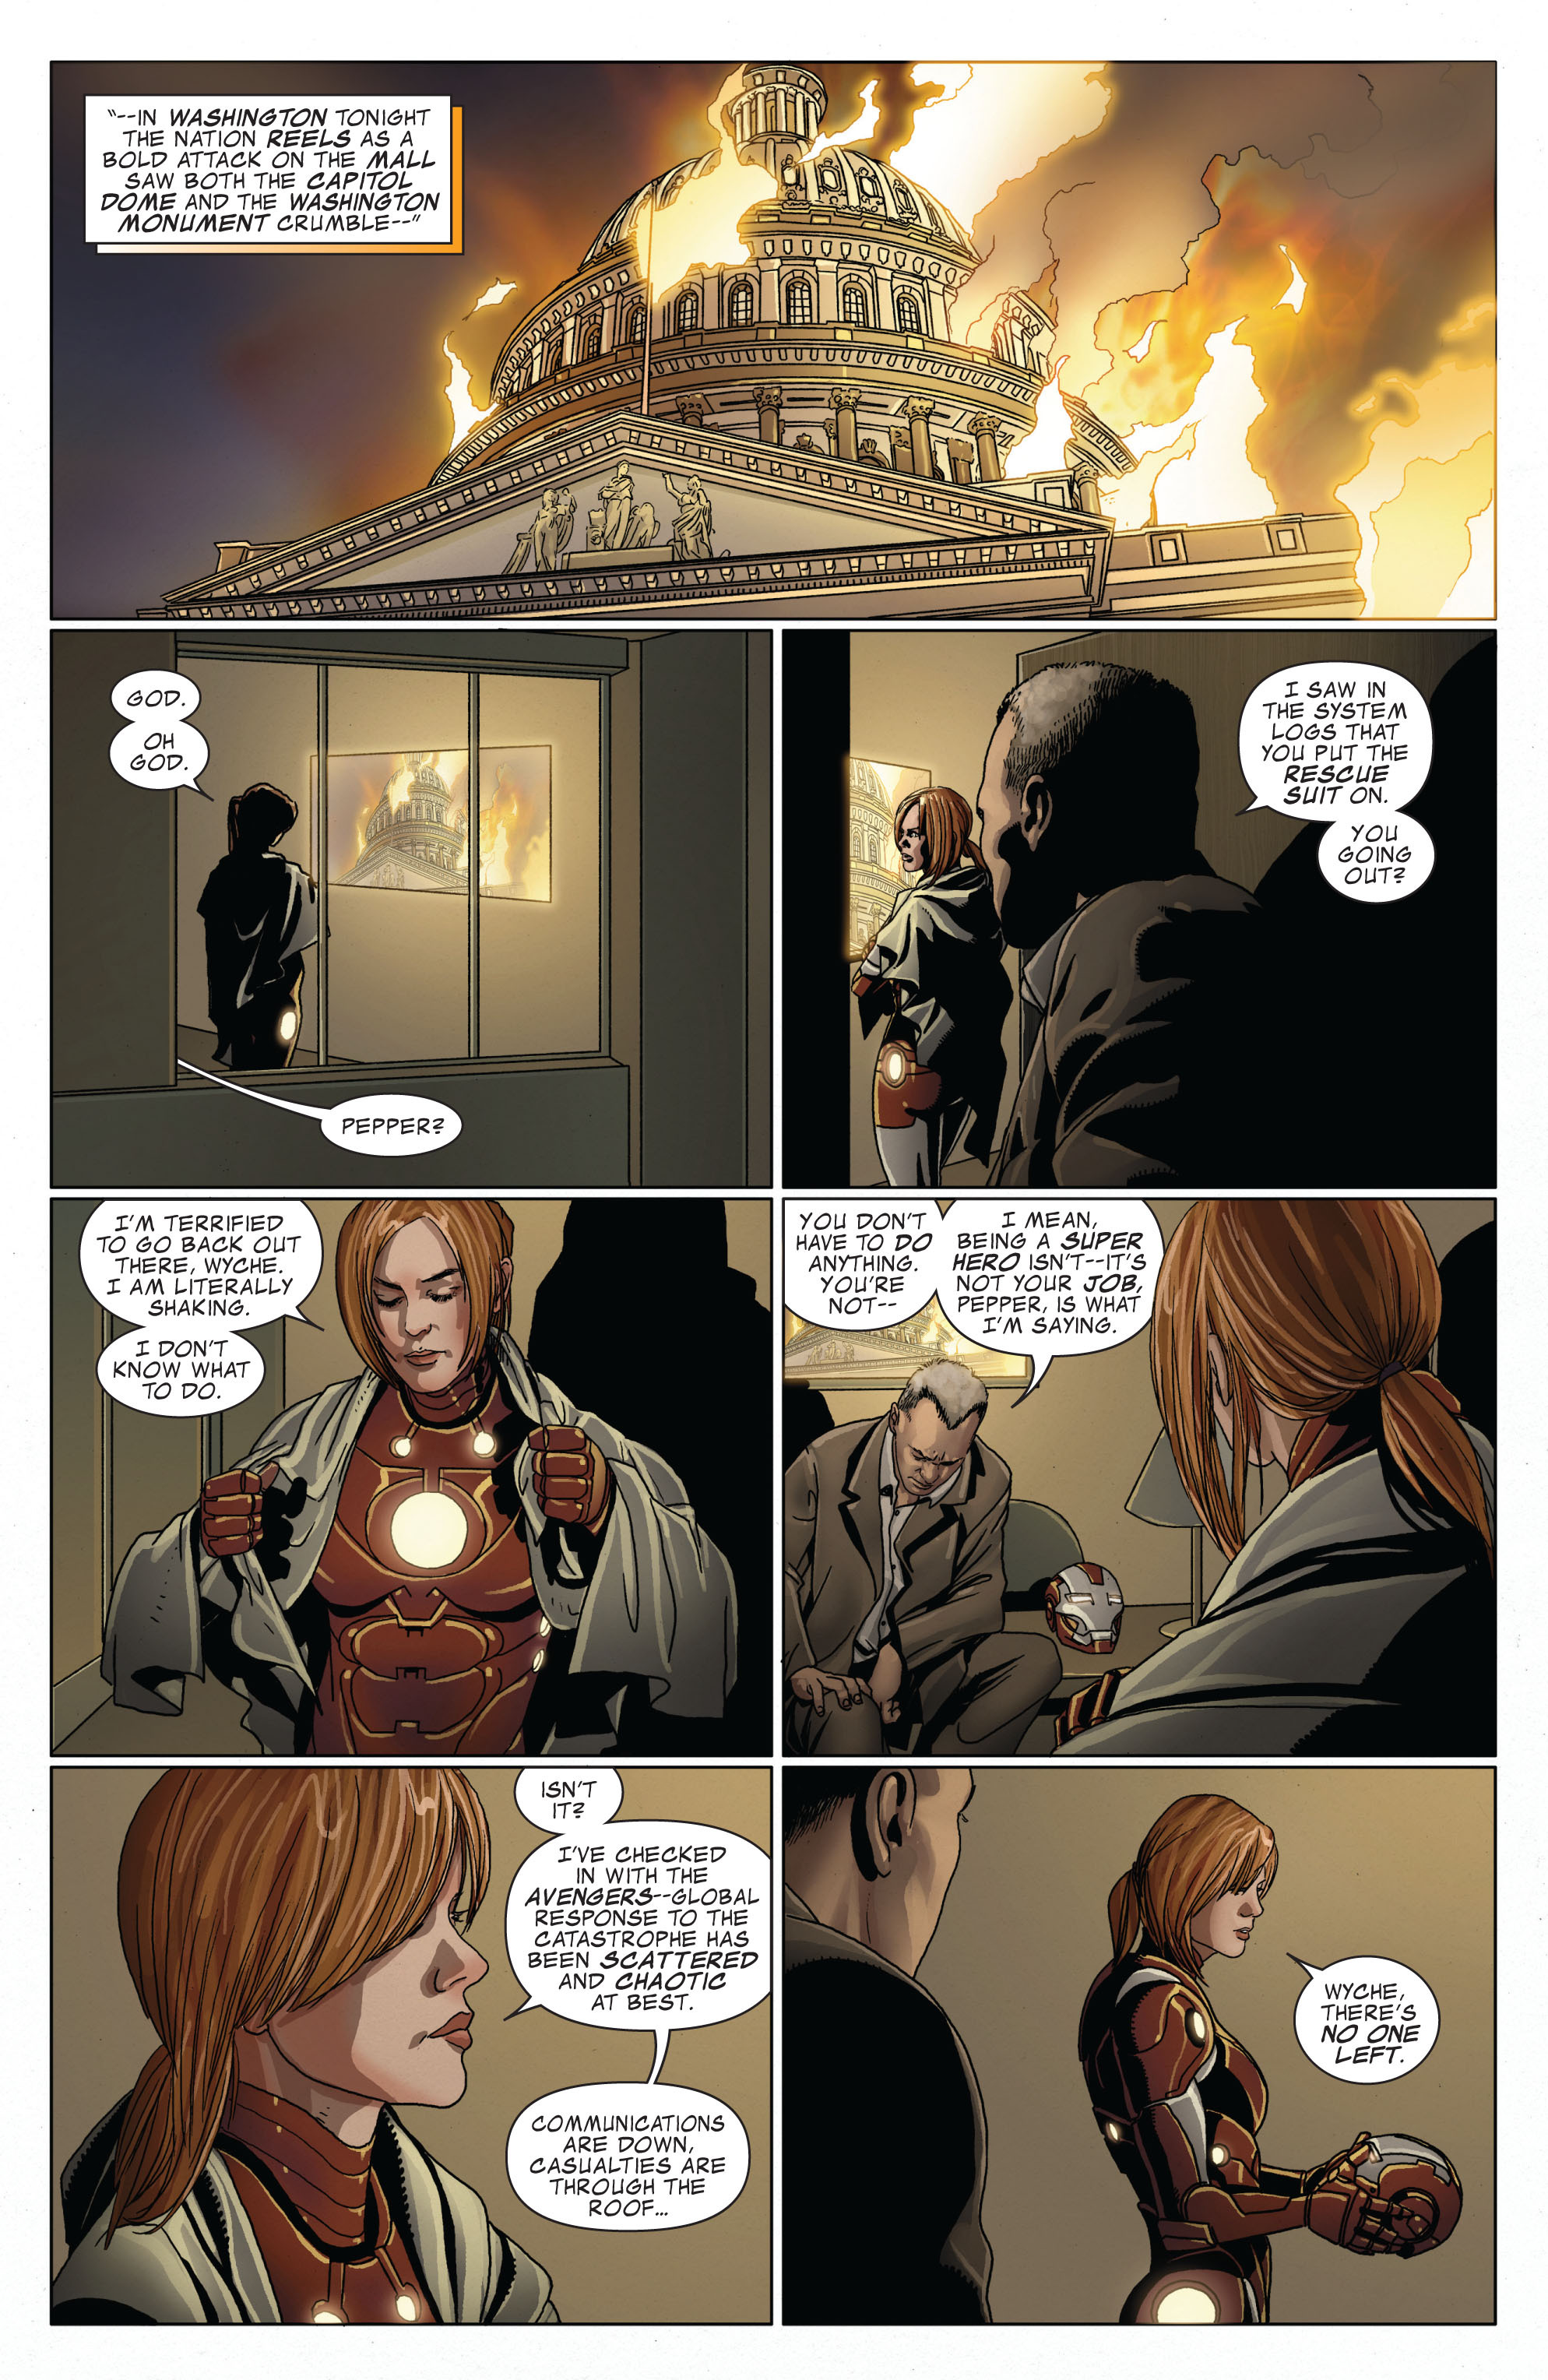 Invincible Iron Man (2008) 506 Page 11